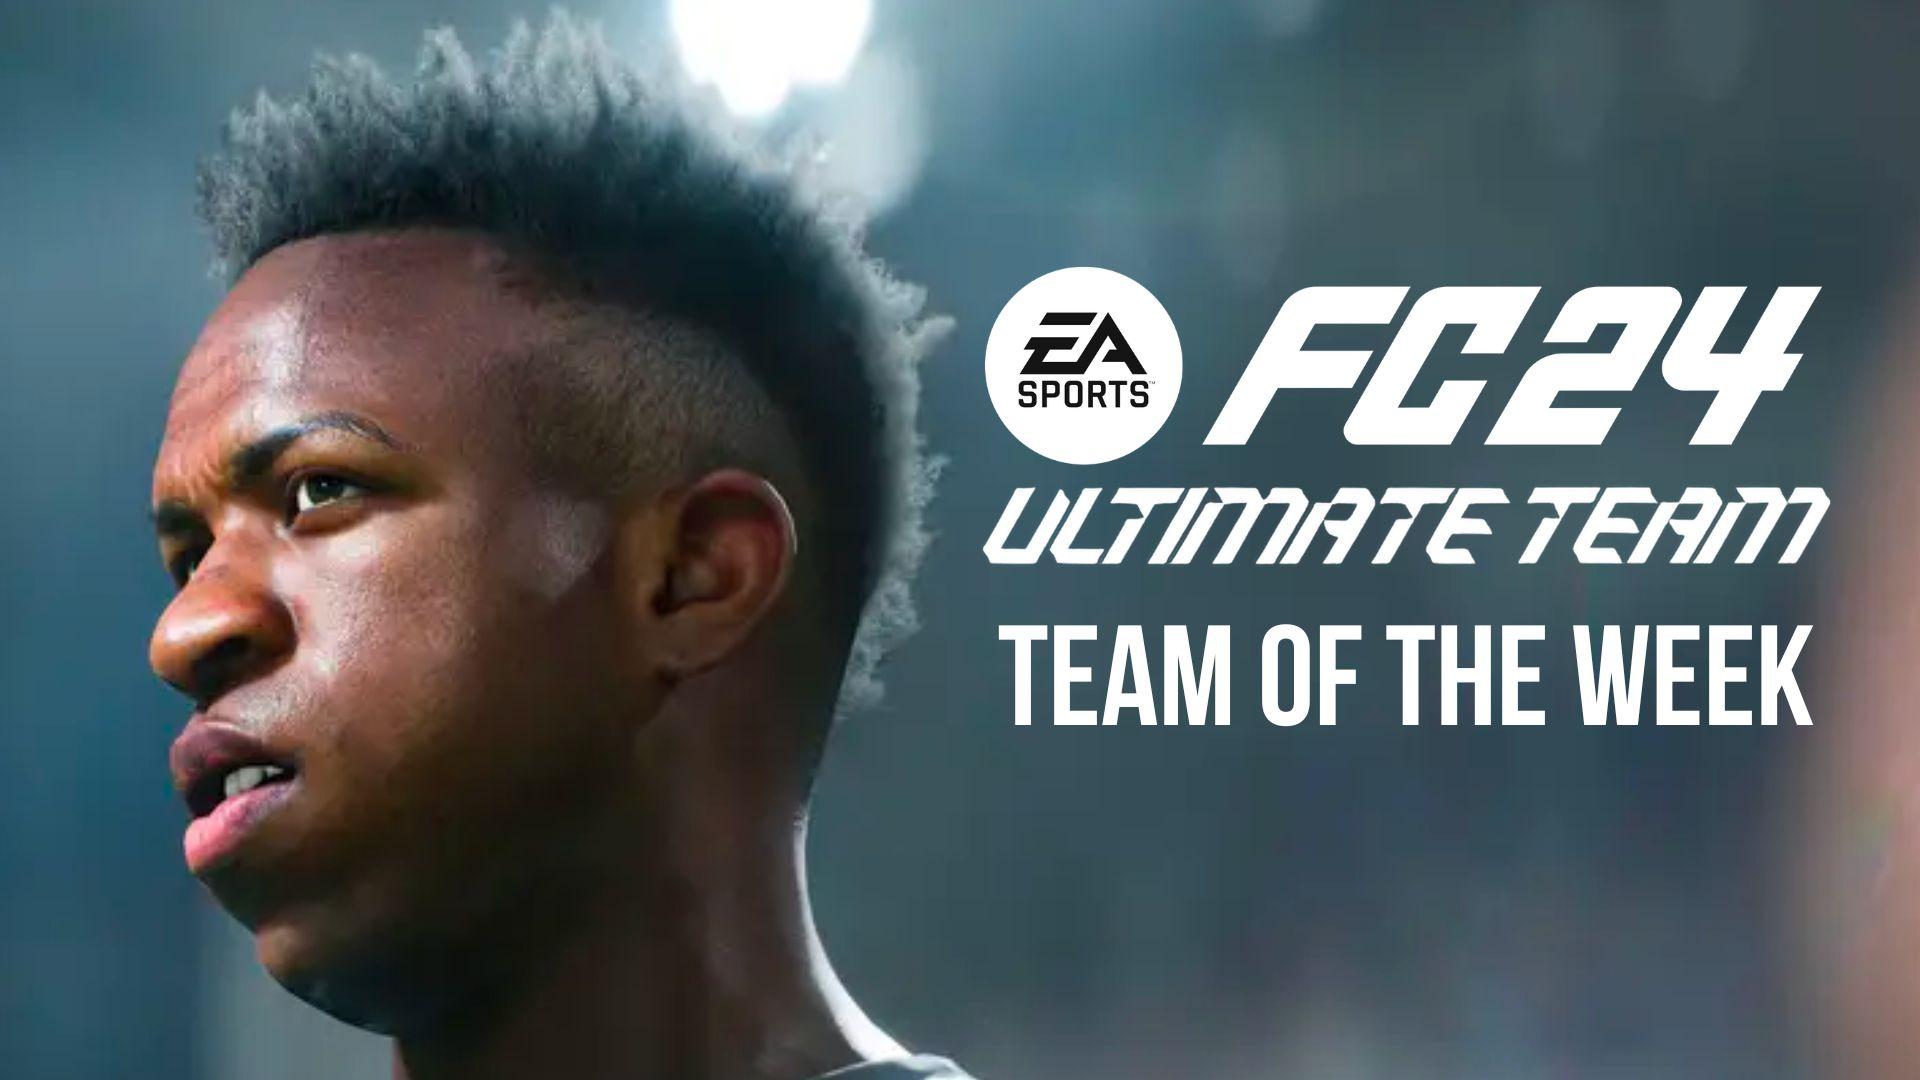 Vinicus Jr in EA SPORTS FC next to text about Team of the Week and Ultimate Team